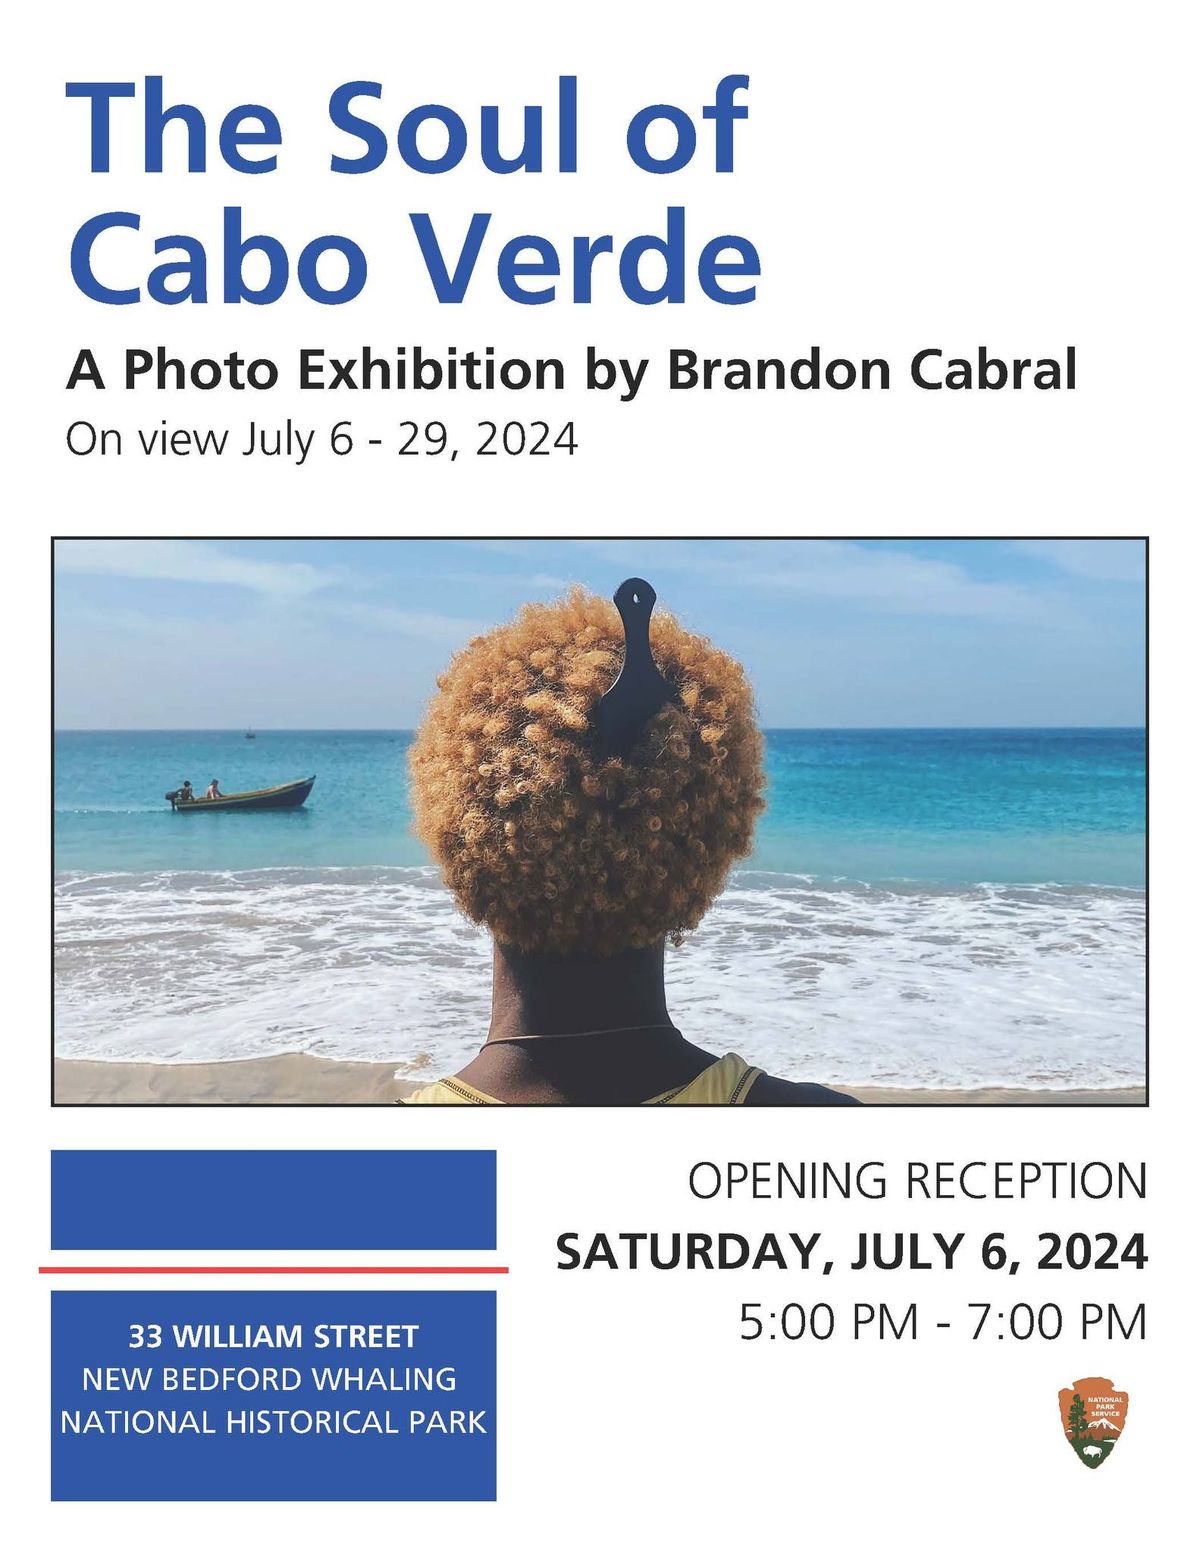 The Soul of Cabo Verde: A Photo Exhibition by Brandon Cabral